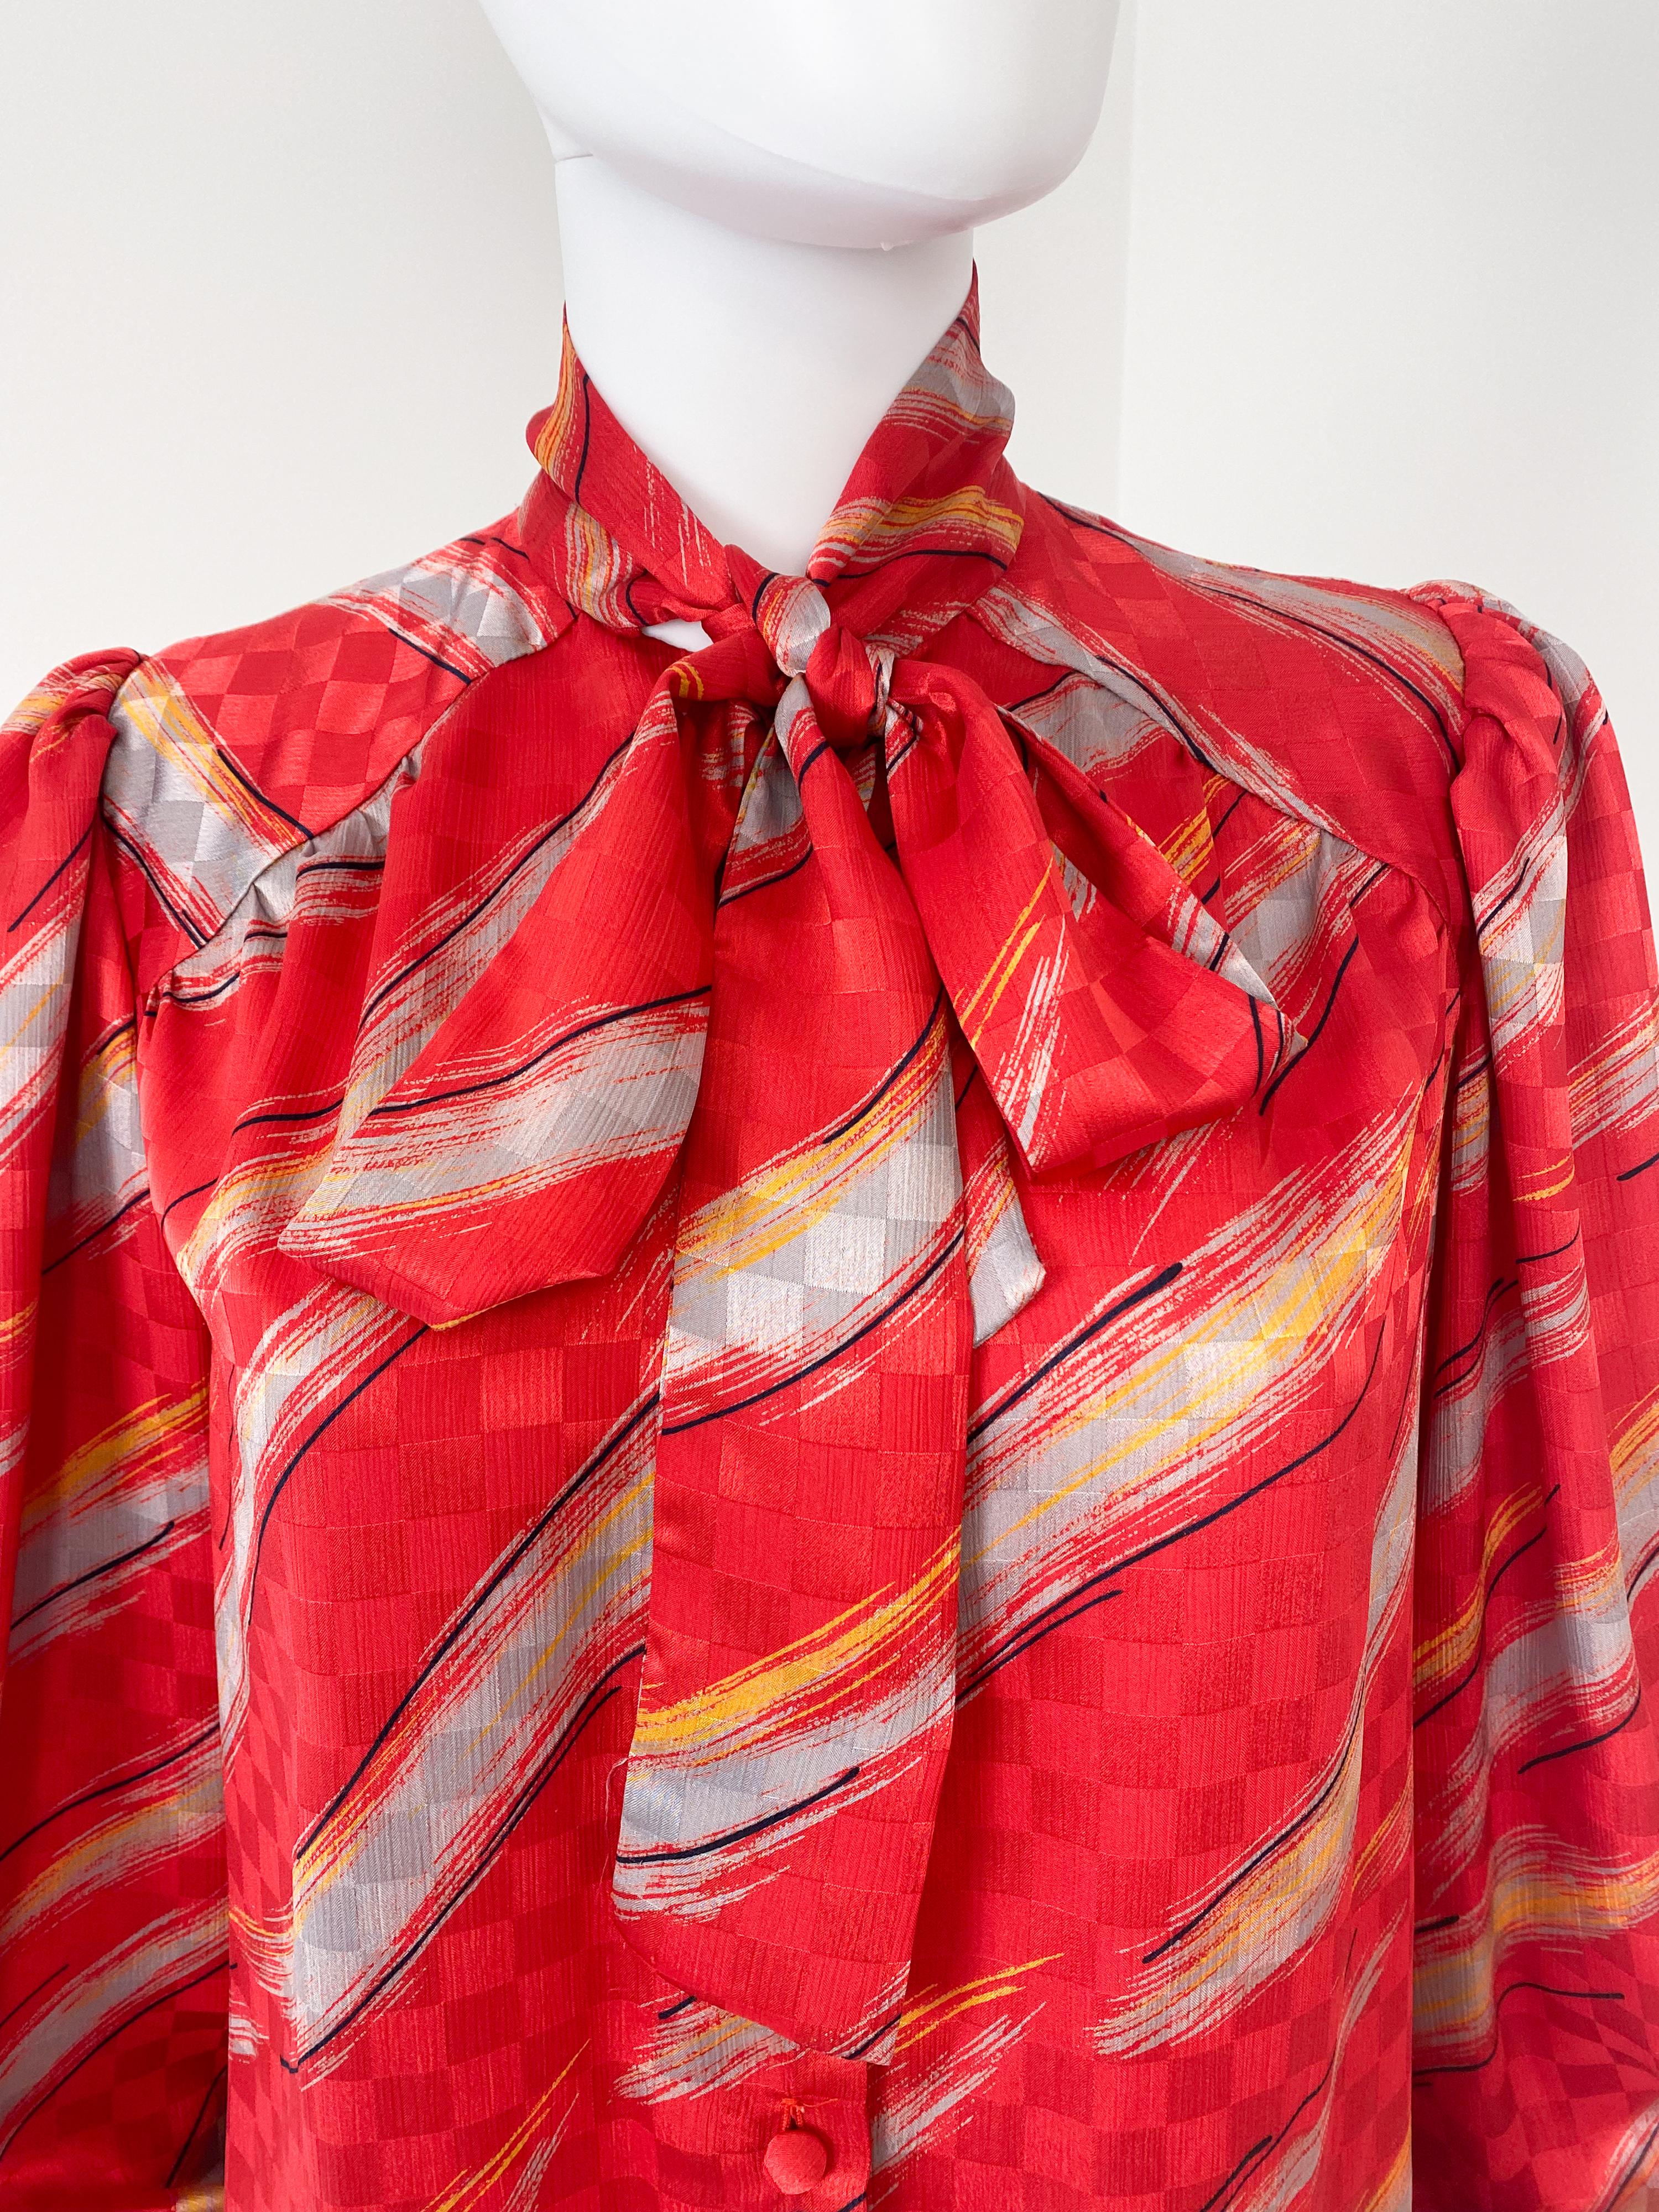 Women's or Men's Vintage 1980s Silky Polyester Blouse Top Red and Gray Slashes Size 10/12 For Sale